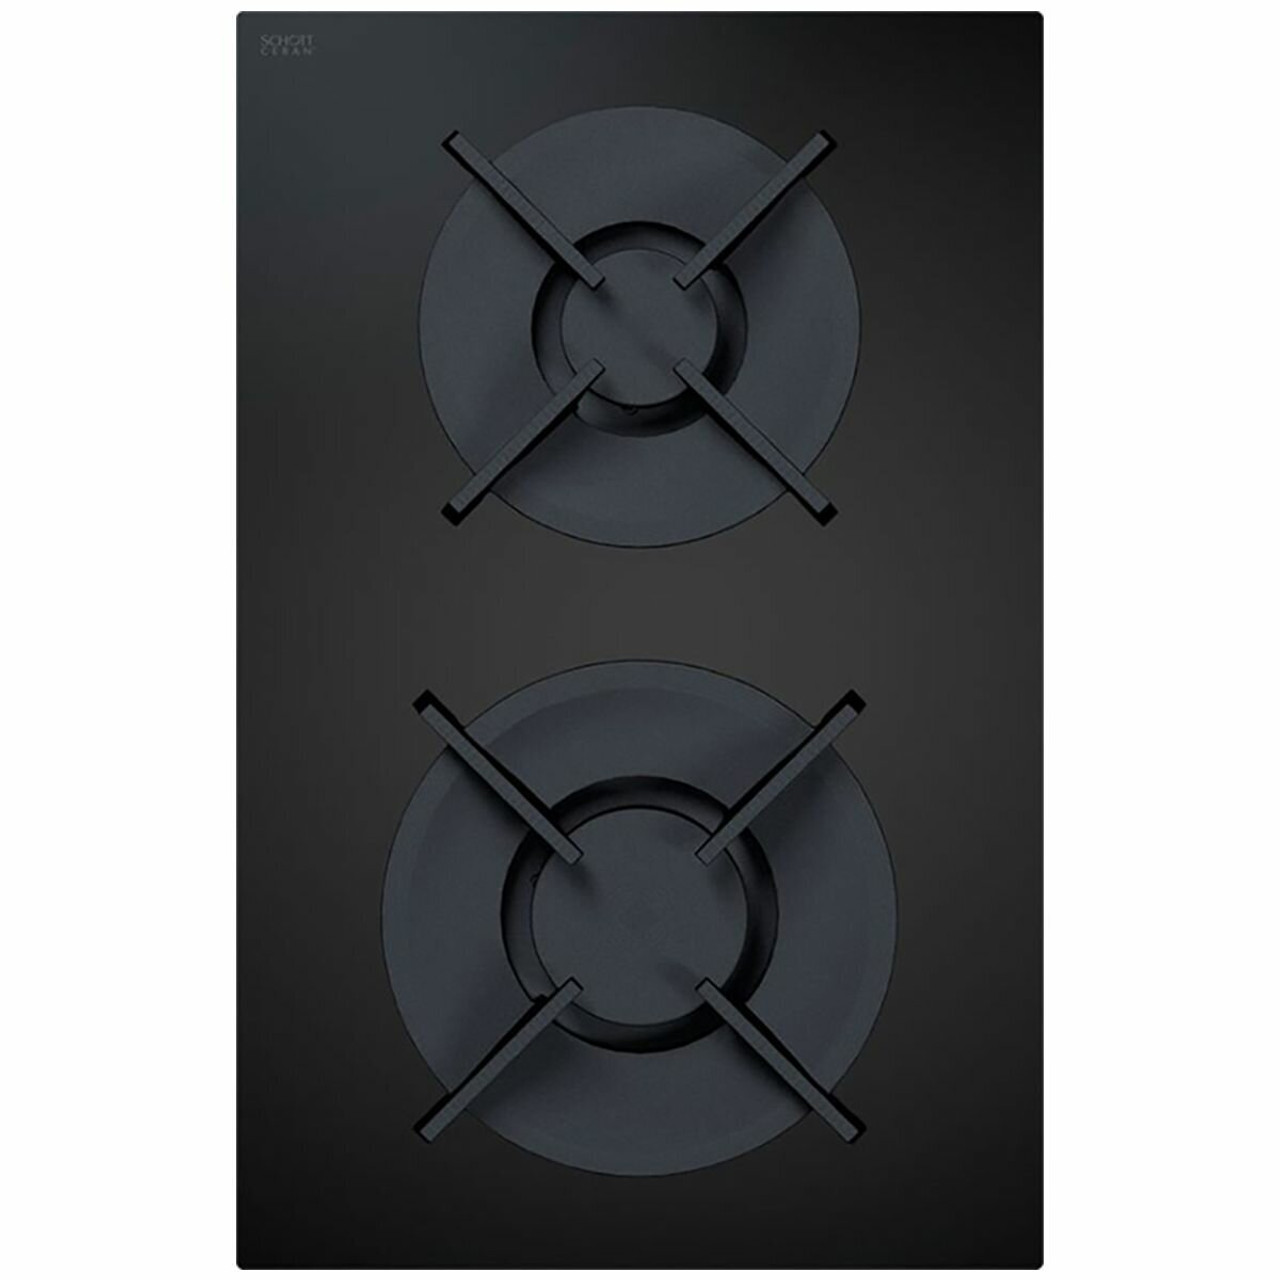 CKA2FIG - Classic 2.0 Set Induction and Gas Cooktop with Integrated Ventilation System - Black